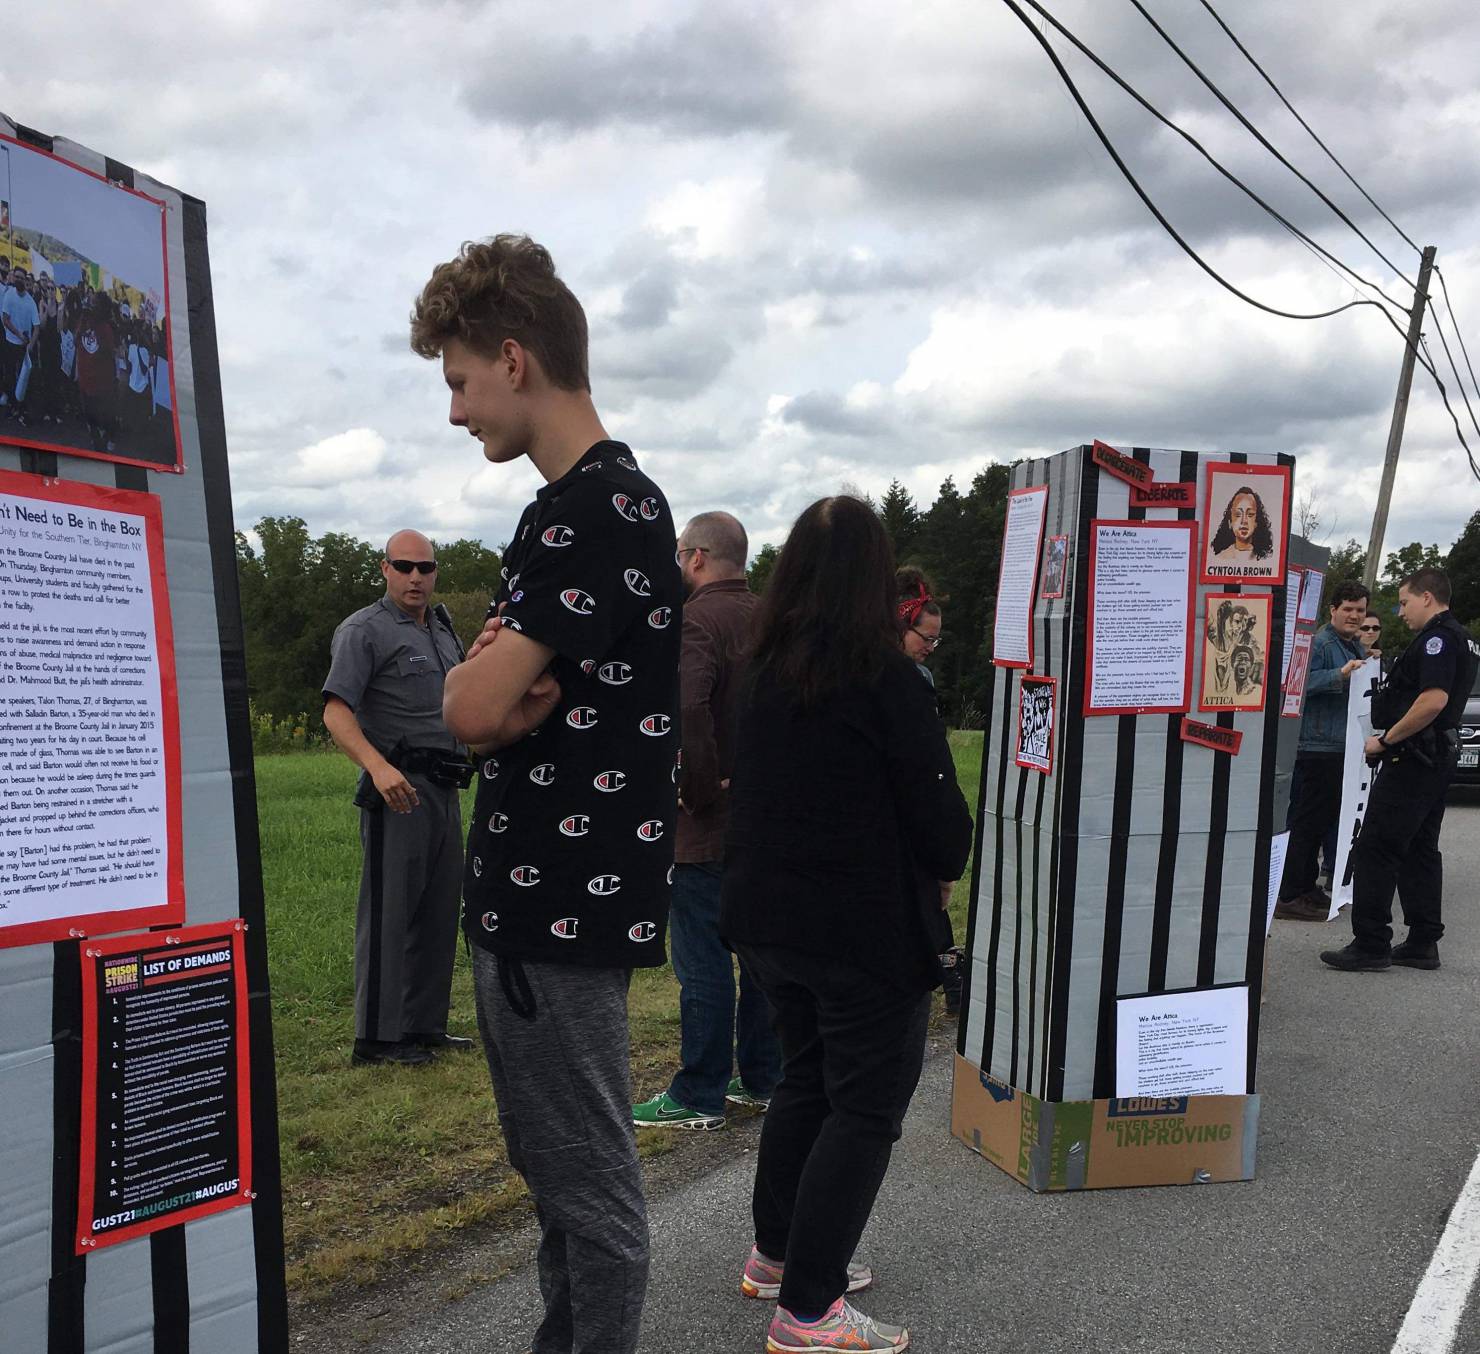 People stand on the roadside, looking at cardboard kiosks on which are placed images and typed text.